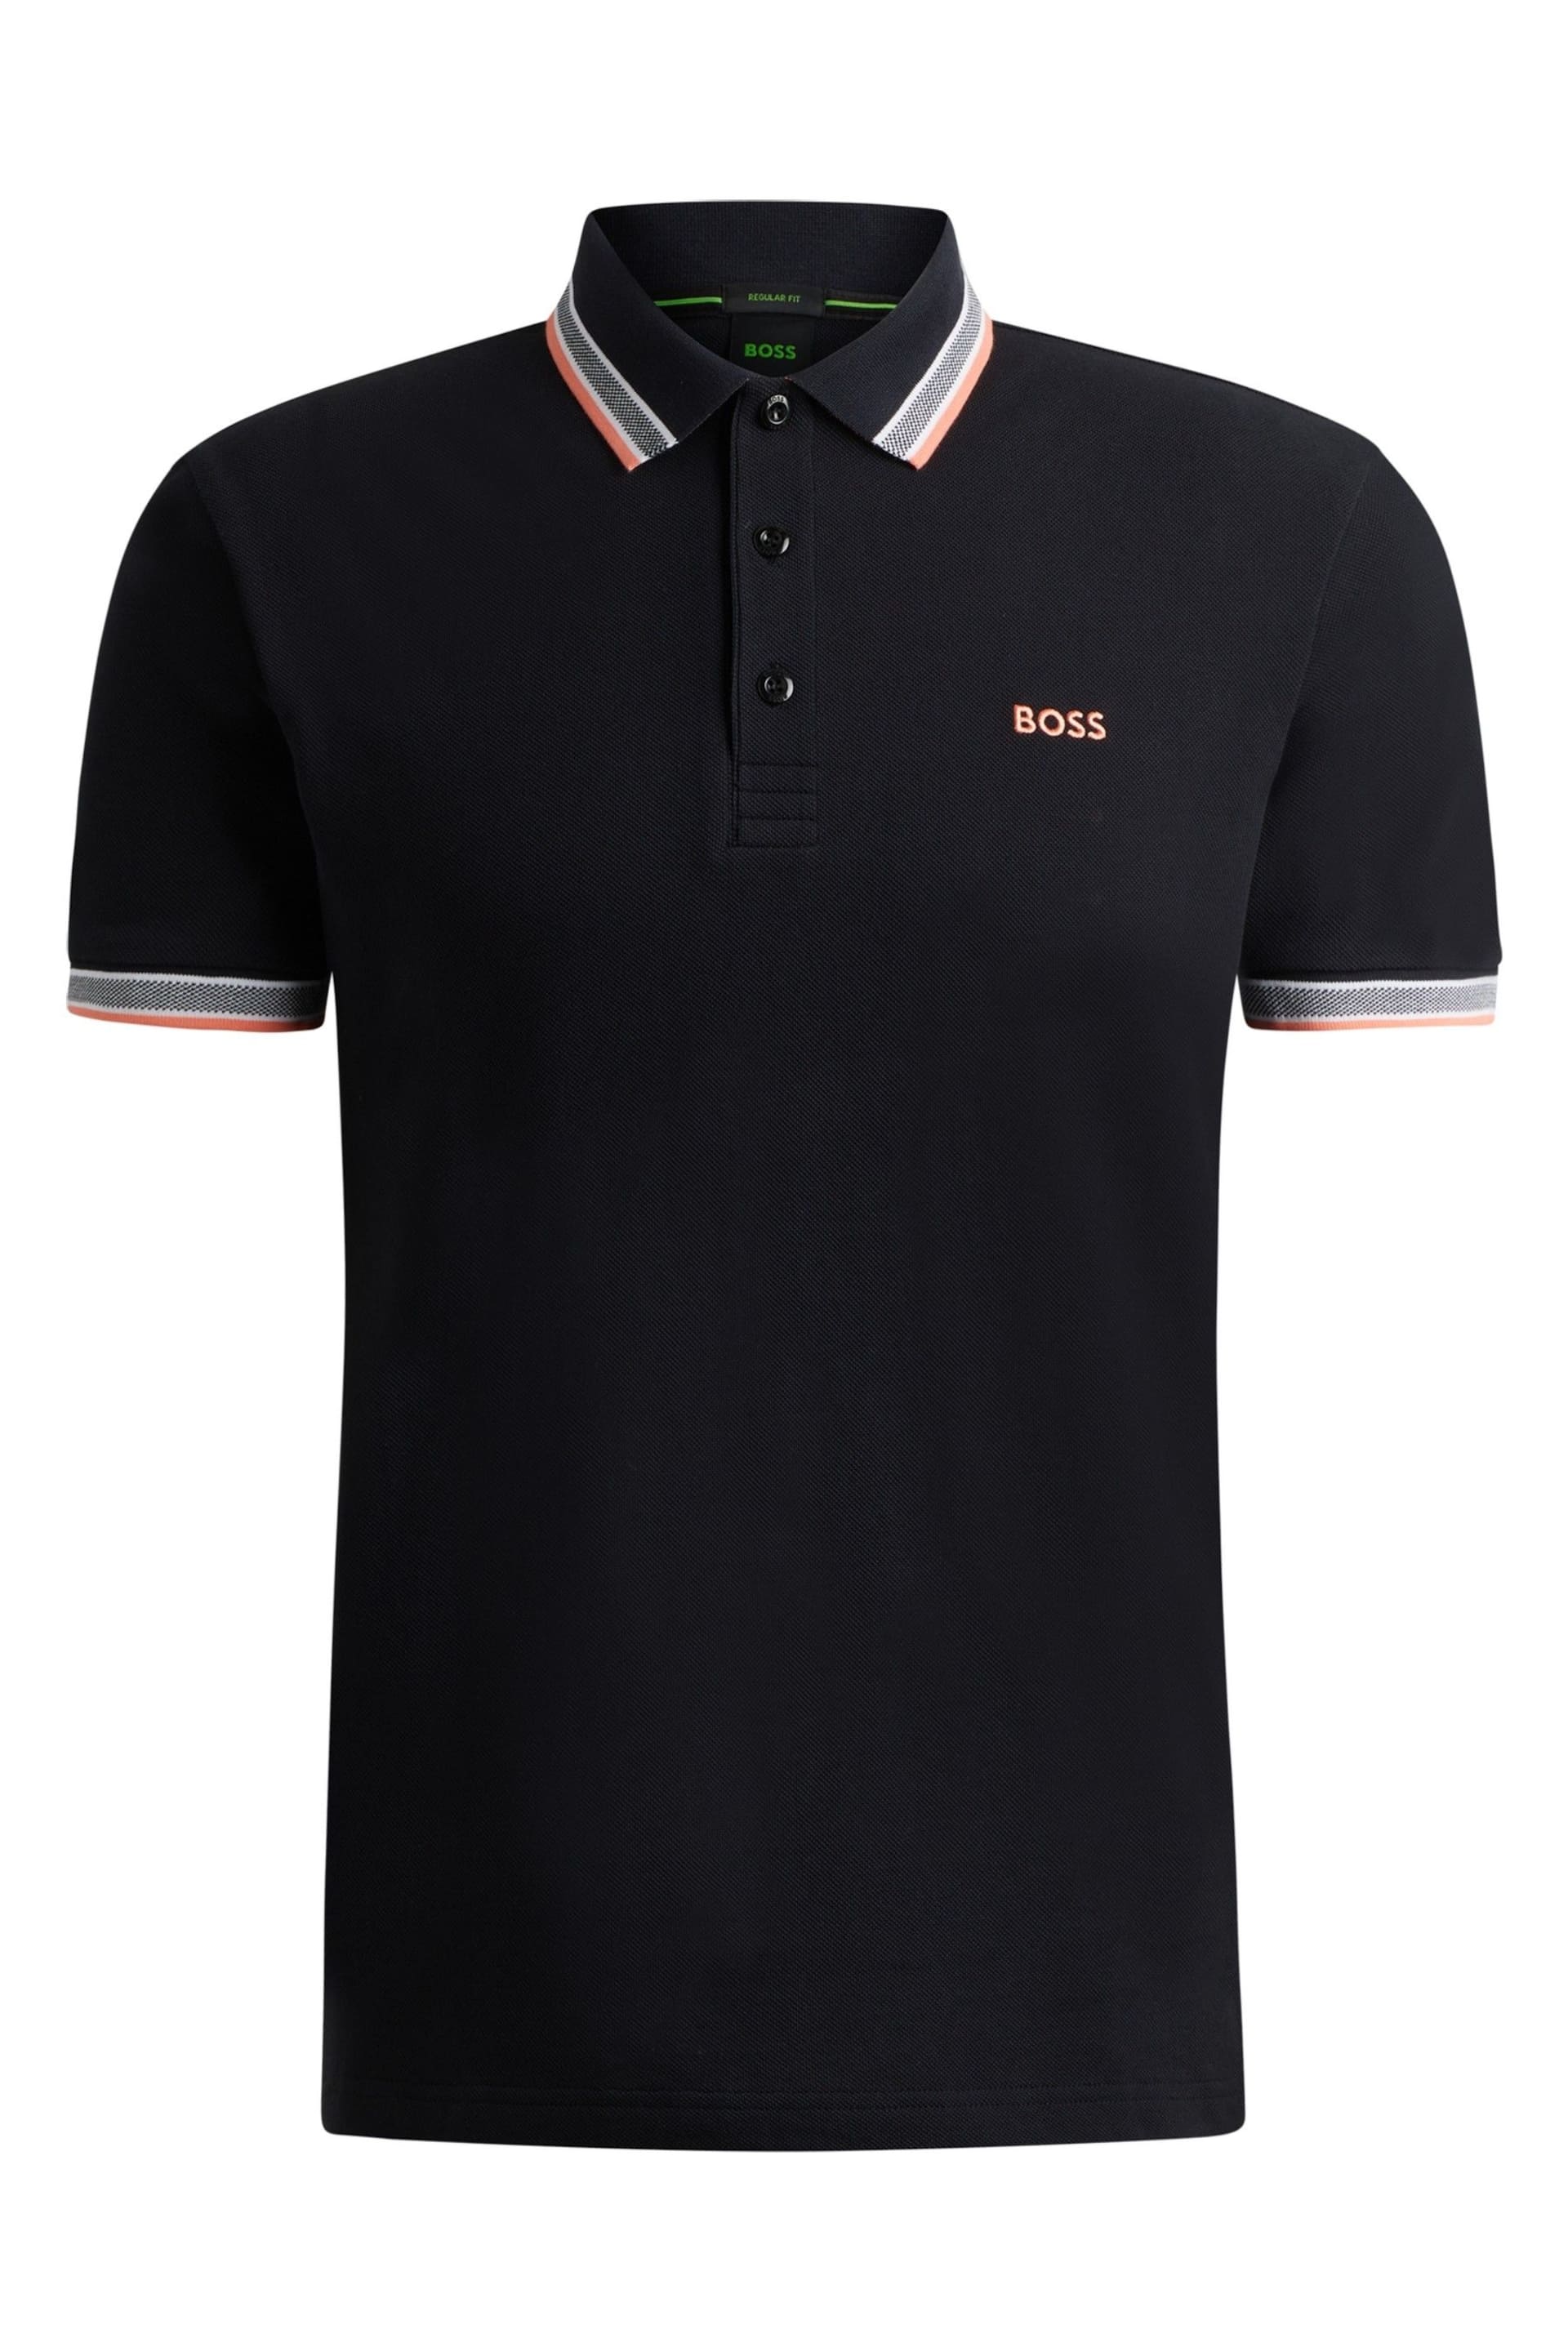 BOSS Black/Orange Tipping Cotton Polo Shirt With Contrast Logo Details - Image 5 of 5